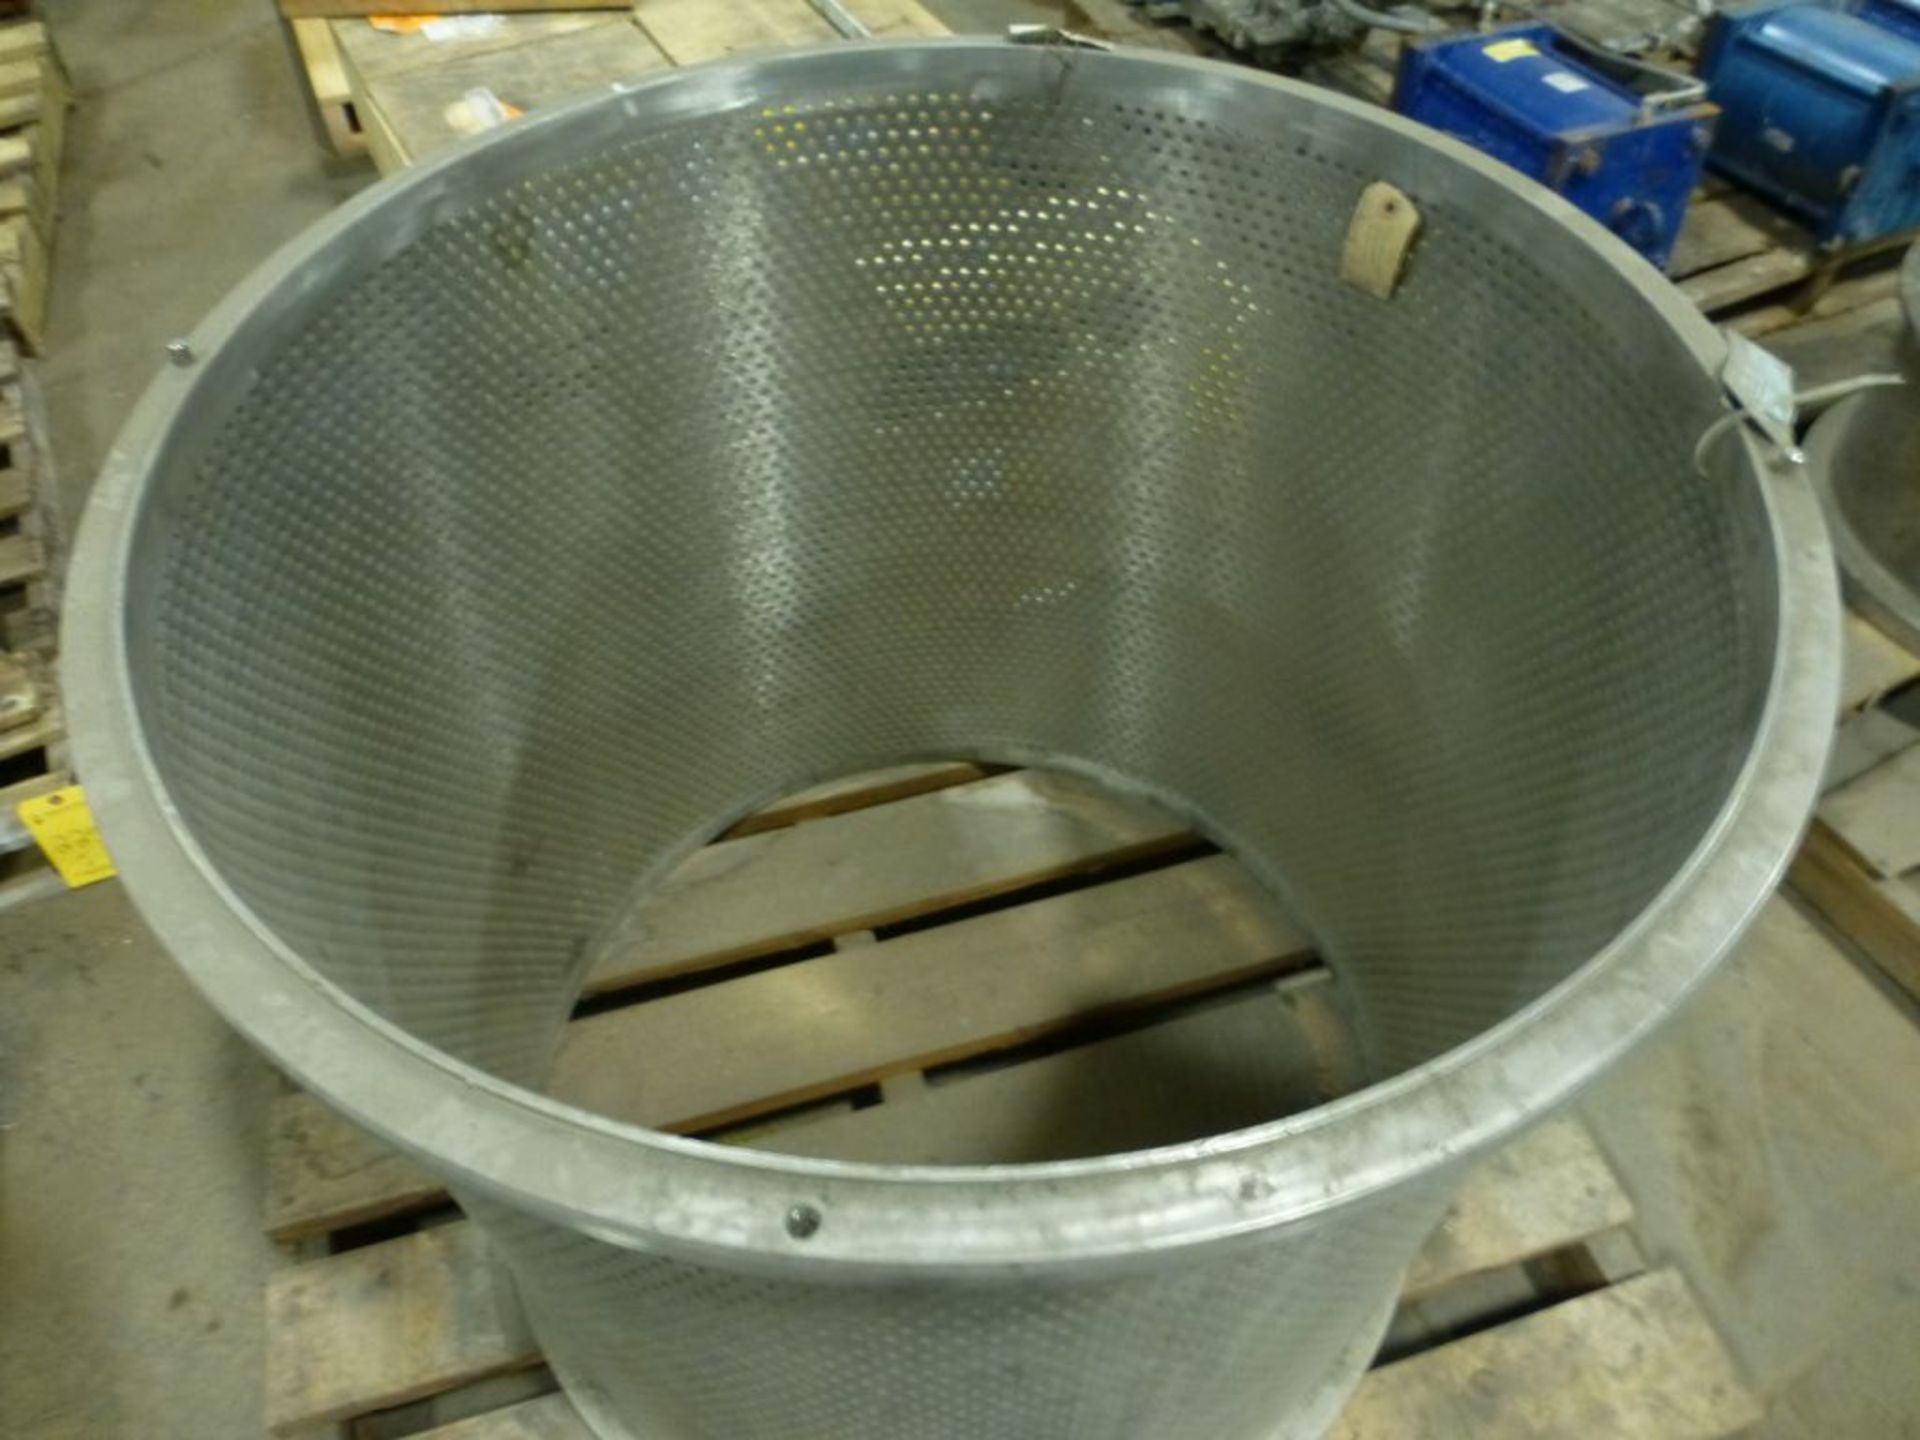 Stainless Steel Perforated Screen Basket | For Bird Model 15 Axiguard Screen w/.25 Diameter Holes - Image 2 of 4